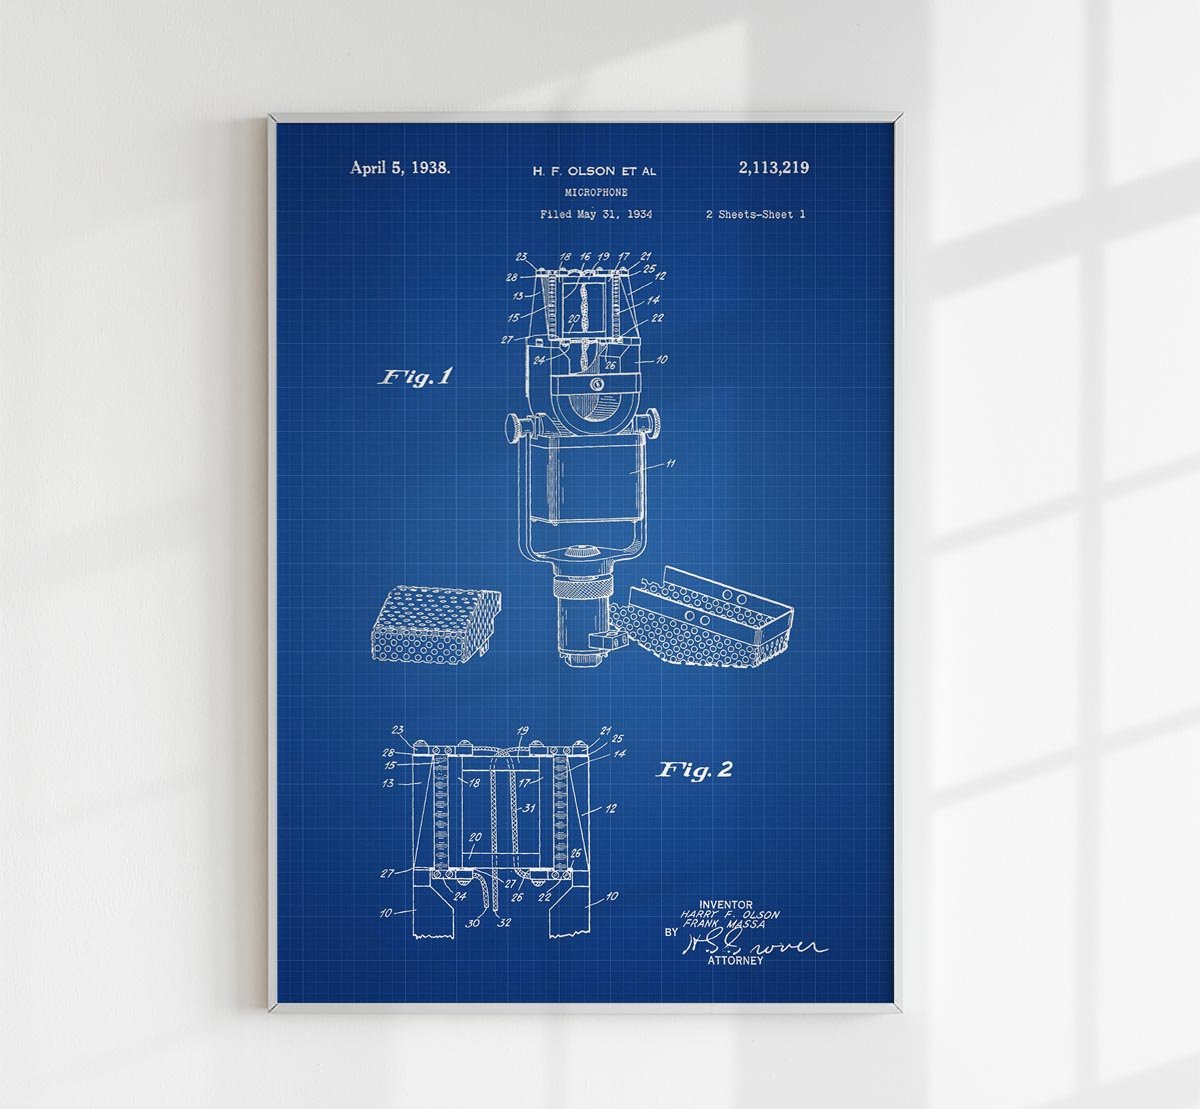 Microphone Patent Poster